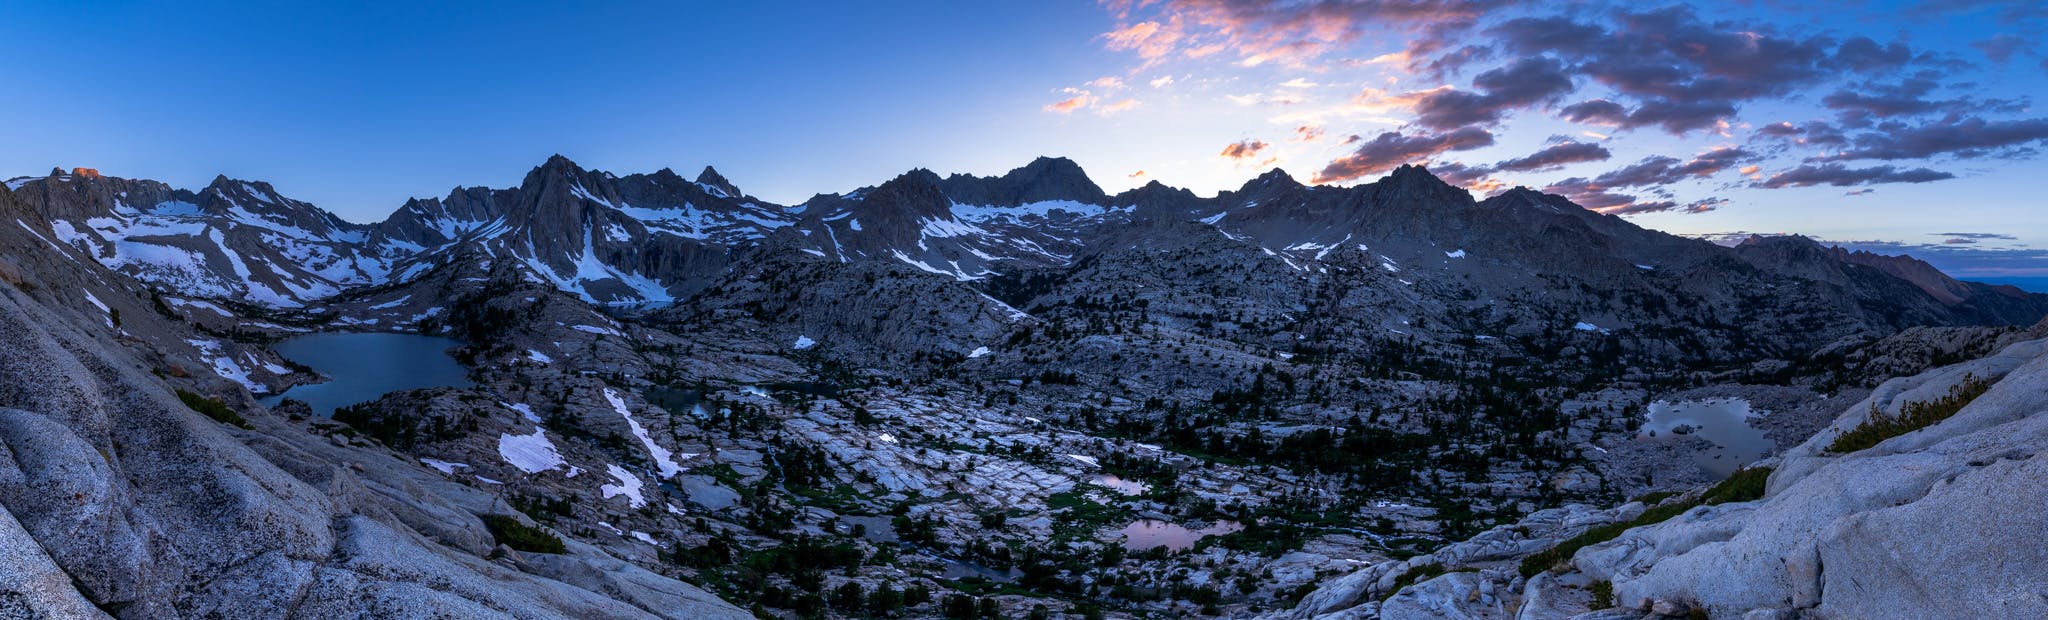 Panoramic shot of a purple sunset over the Sabrina Basin in the Eastern Sierra.  Photo by Brock Dallman